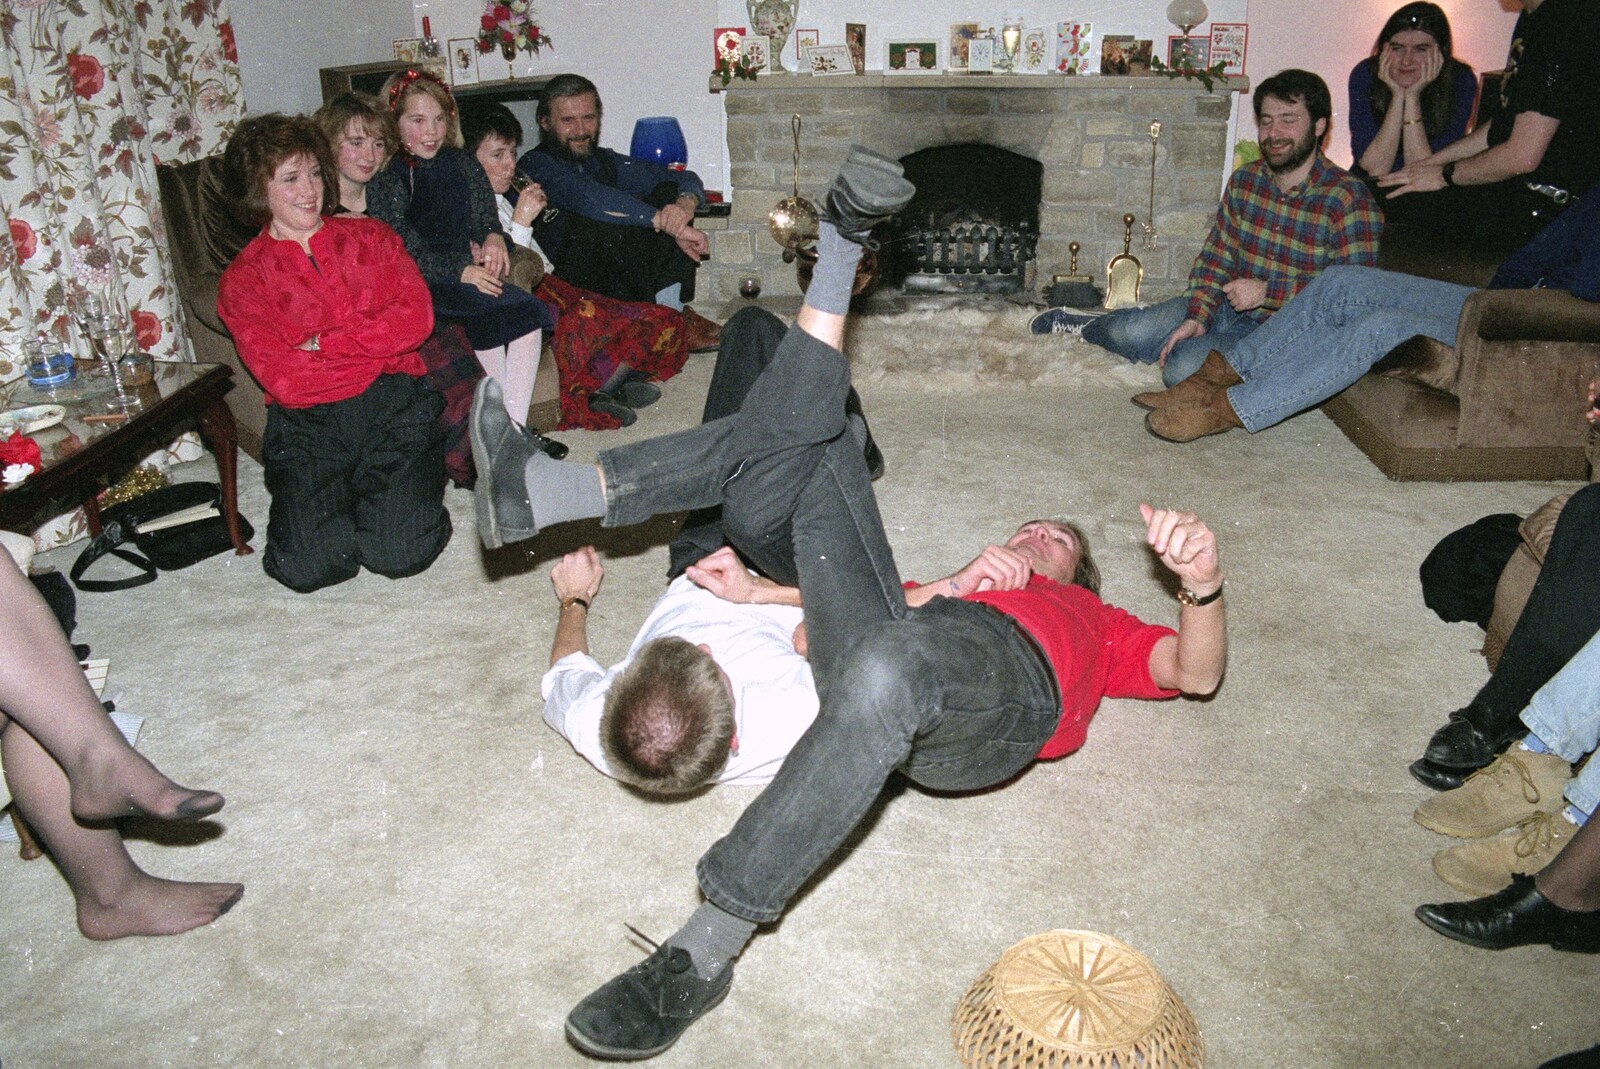 Nosher and Phil do a spot of leg wrestling from New Year's Eve at Phil's, Hordle, Hampshire - 31st December 1990